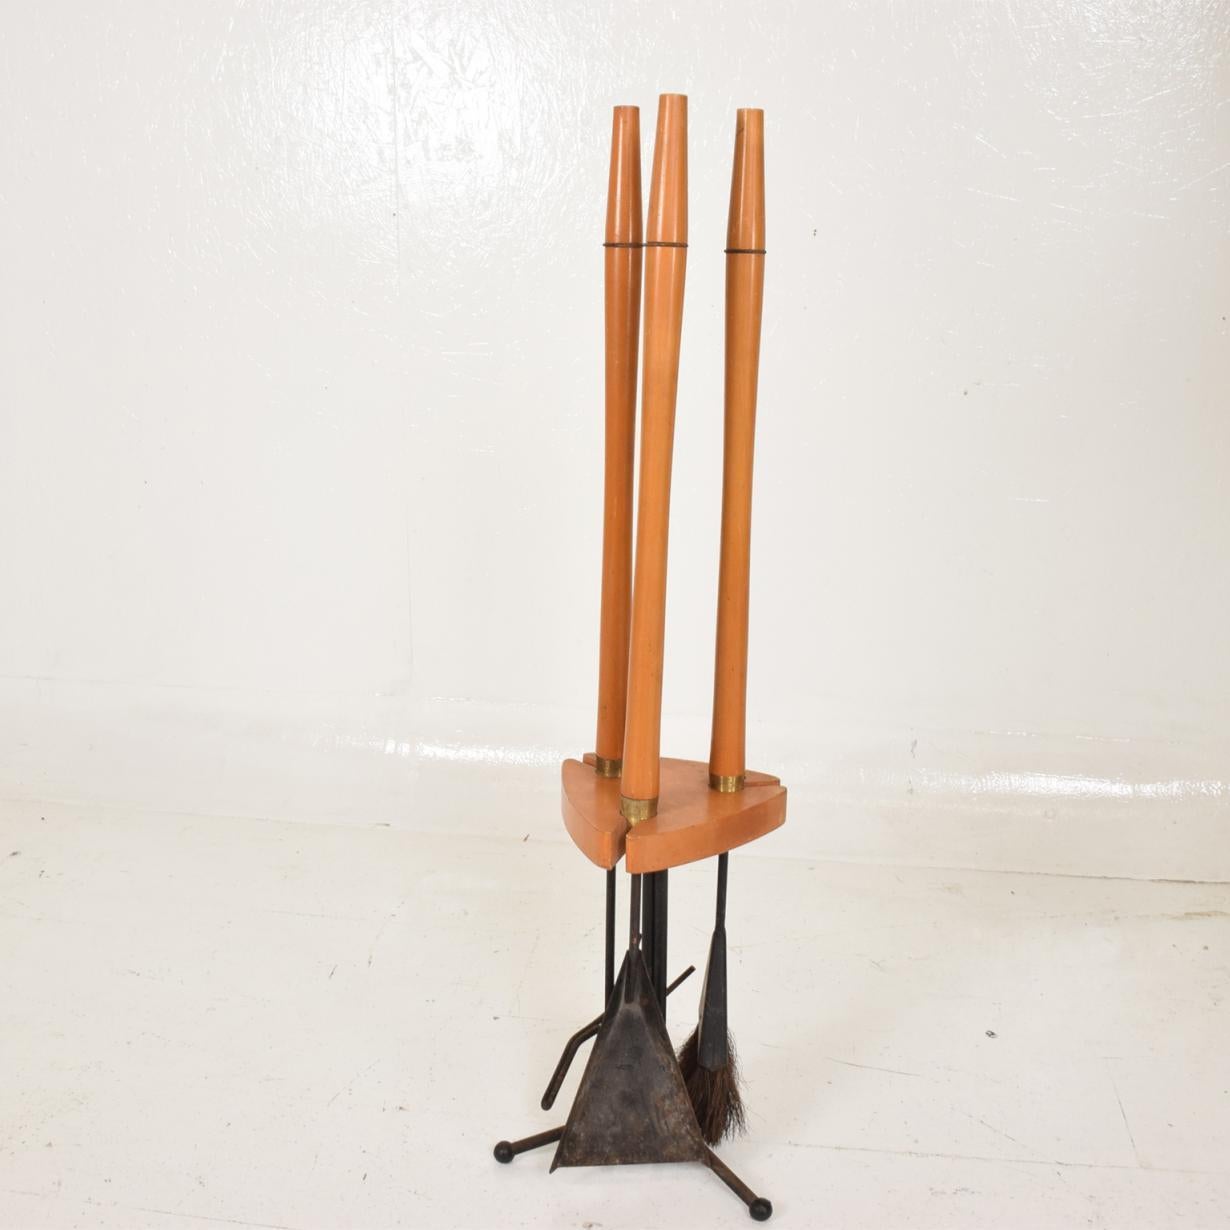 For your consideration, a Mid-Century Modern fire tool set maple iron after Arthur Umanoff.

Made in the USA circa the 1960s.

Dimensions: 37 1/2